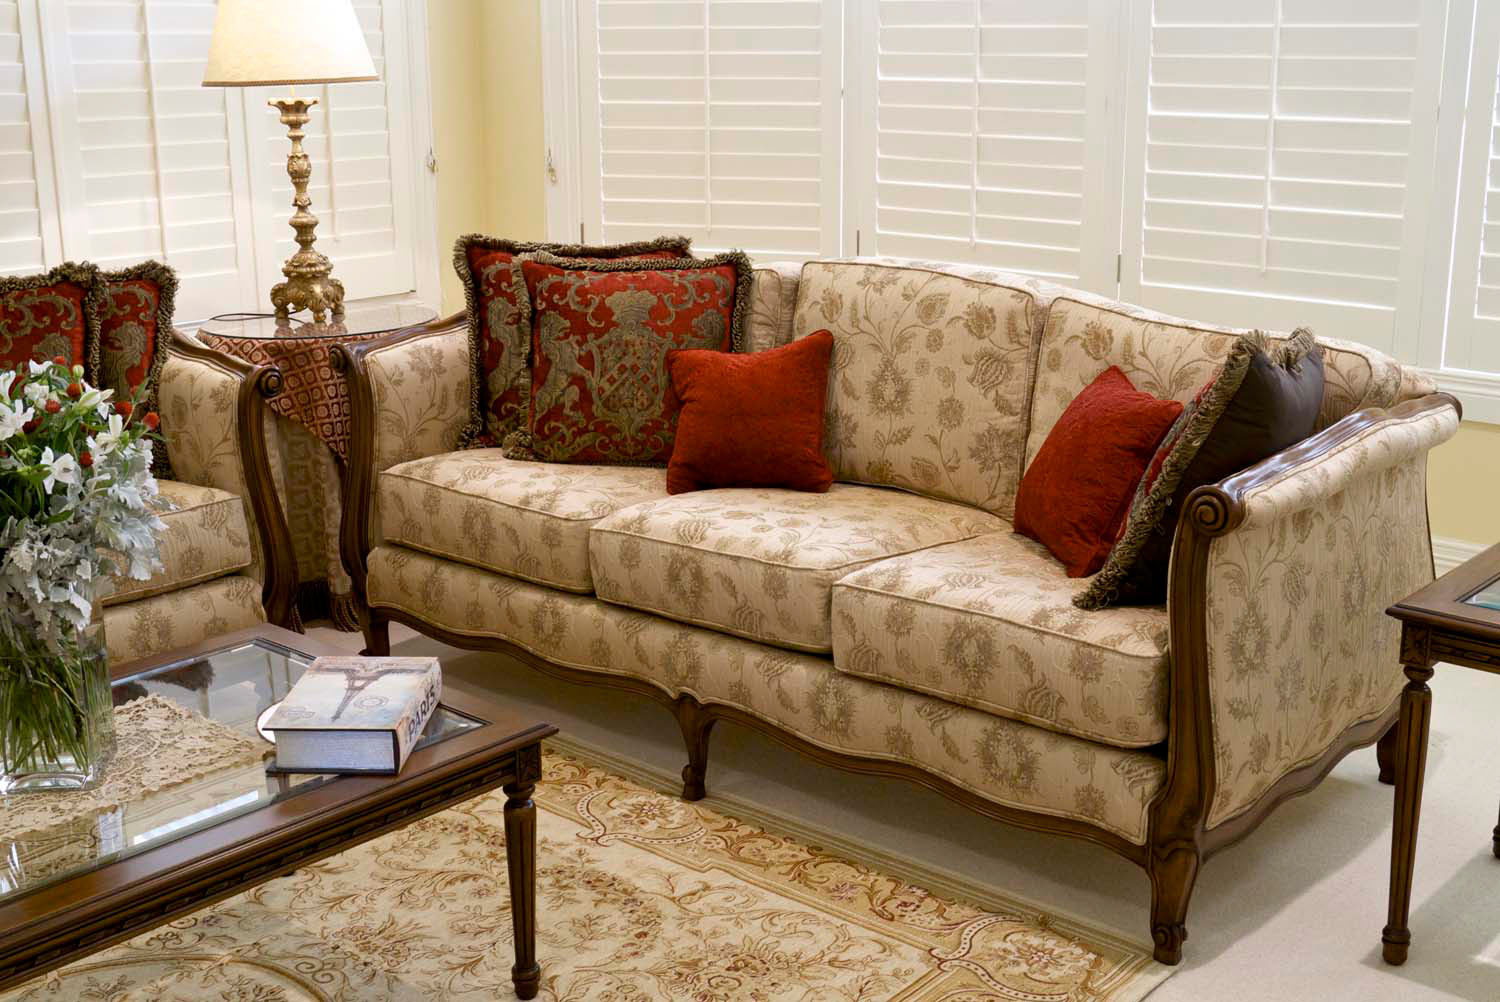 6 French daybed or sofa with side table, lamp and coffee table in demask fabric